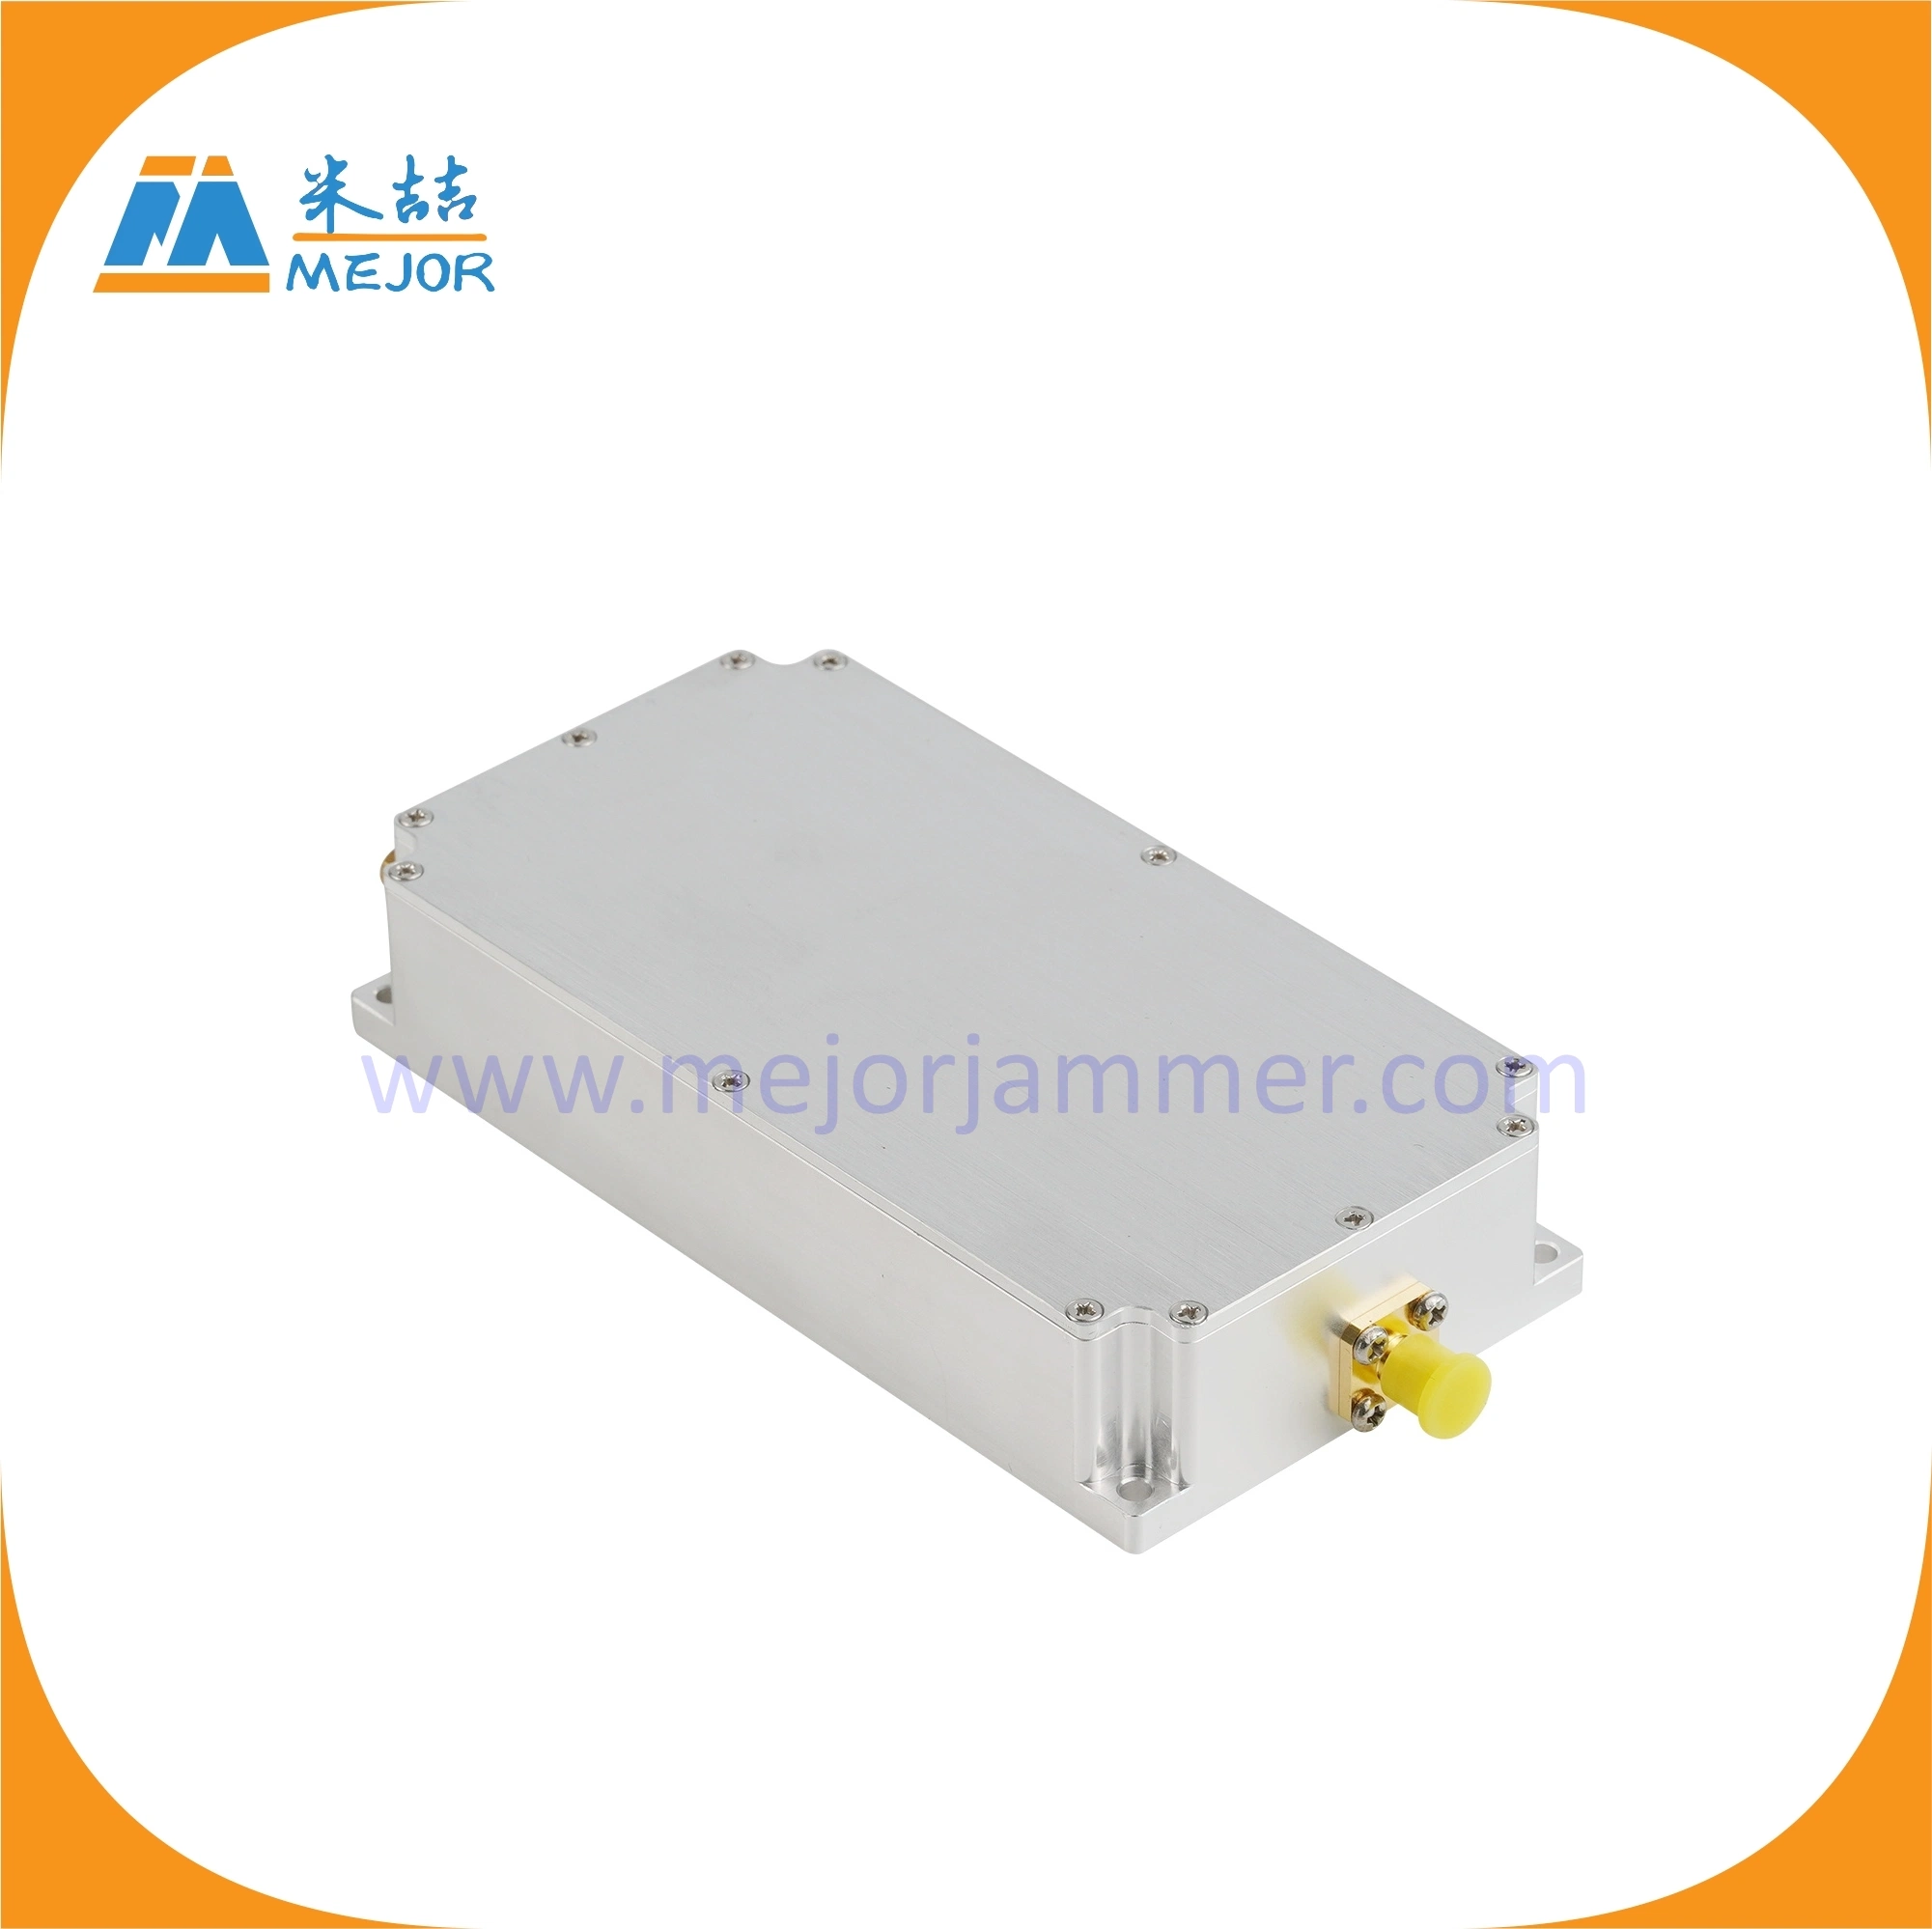 100watts 55dB 5.8GHz WiFi RF Power Amplifier with Vswr and Temperature Protection